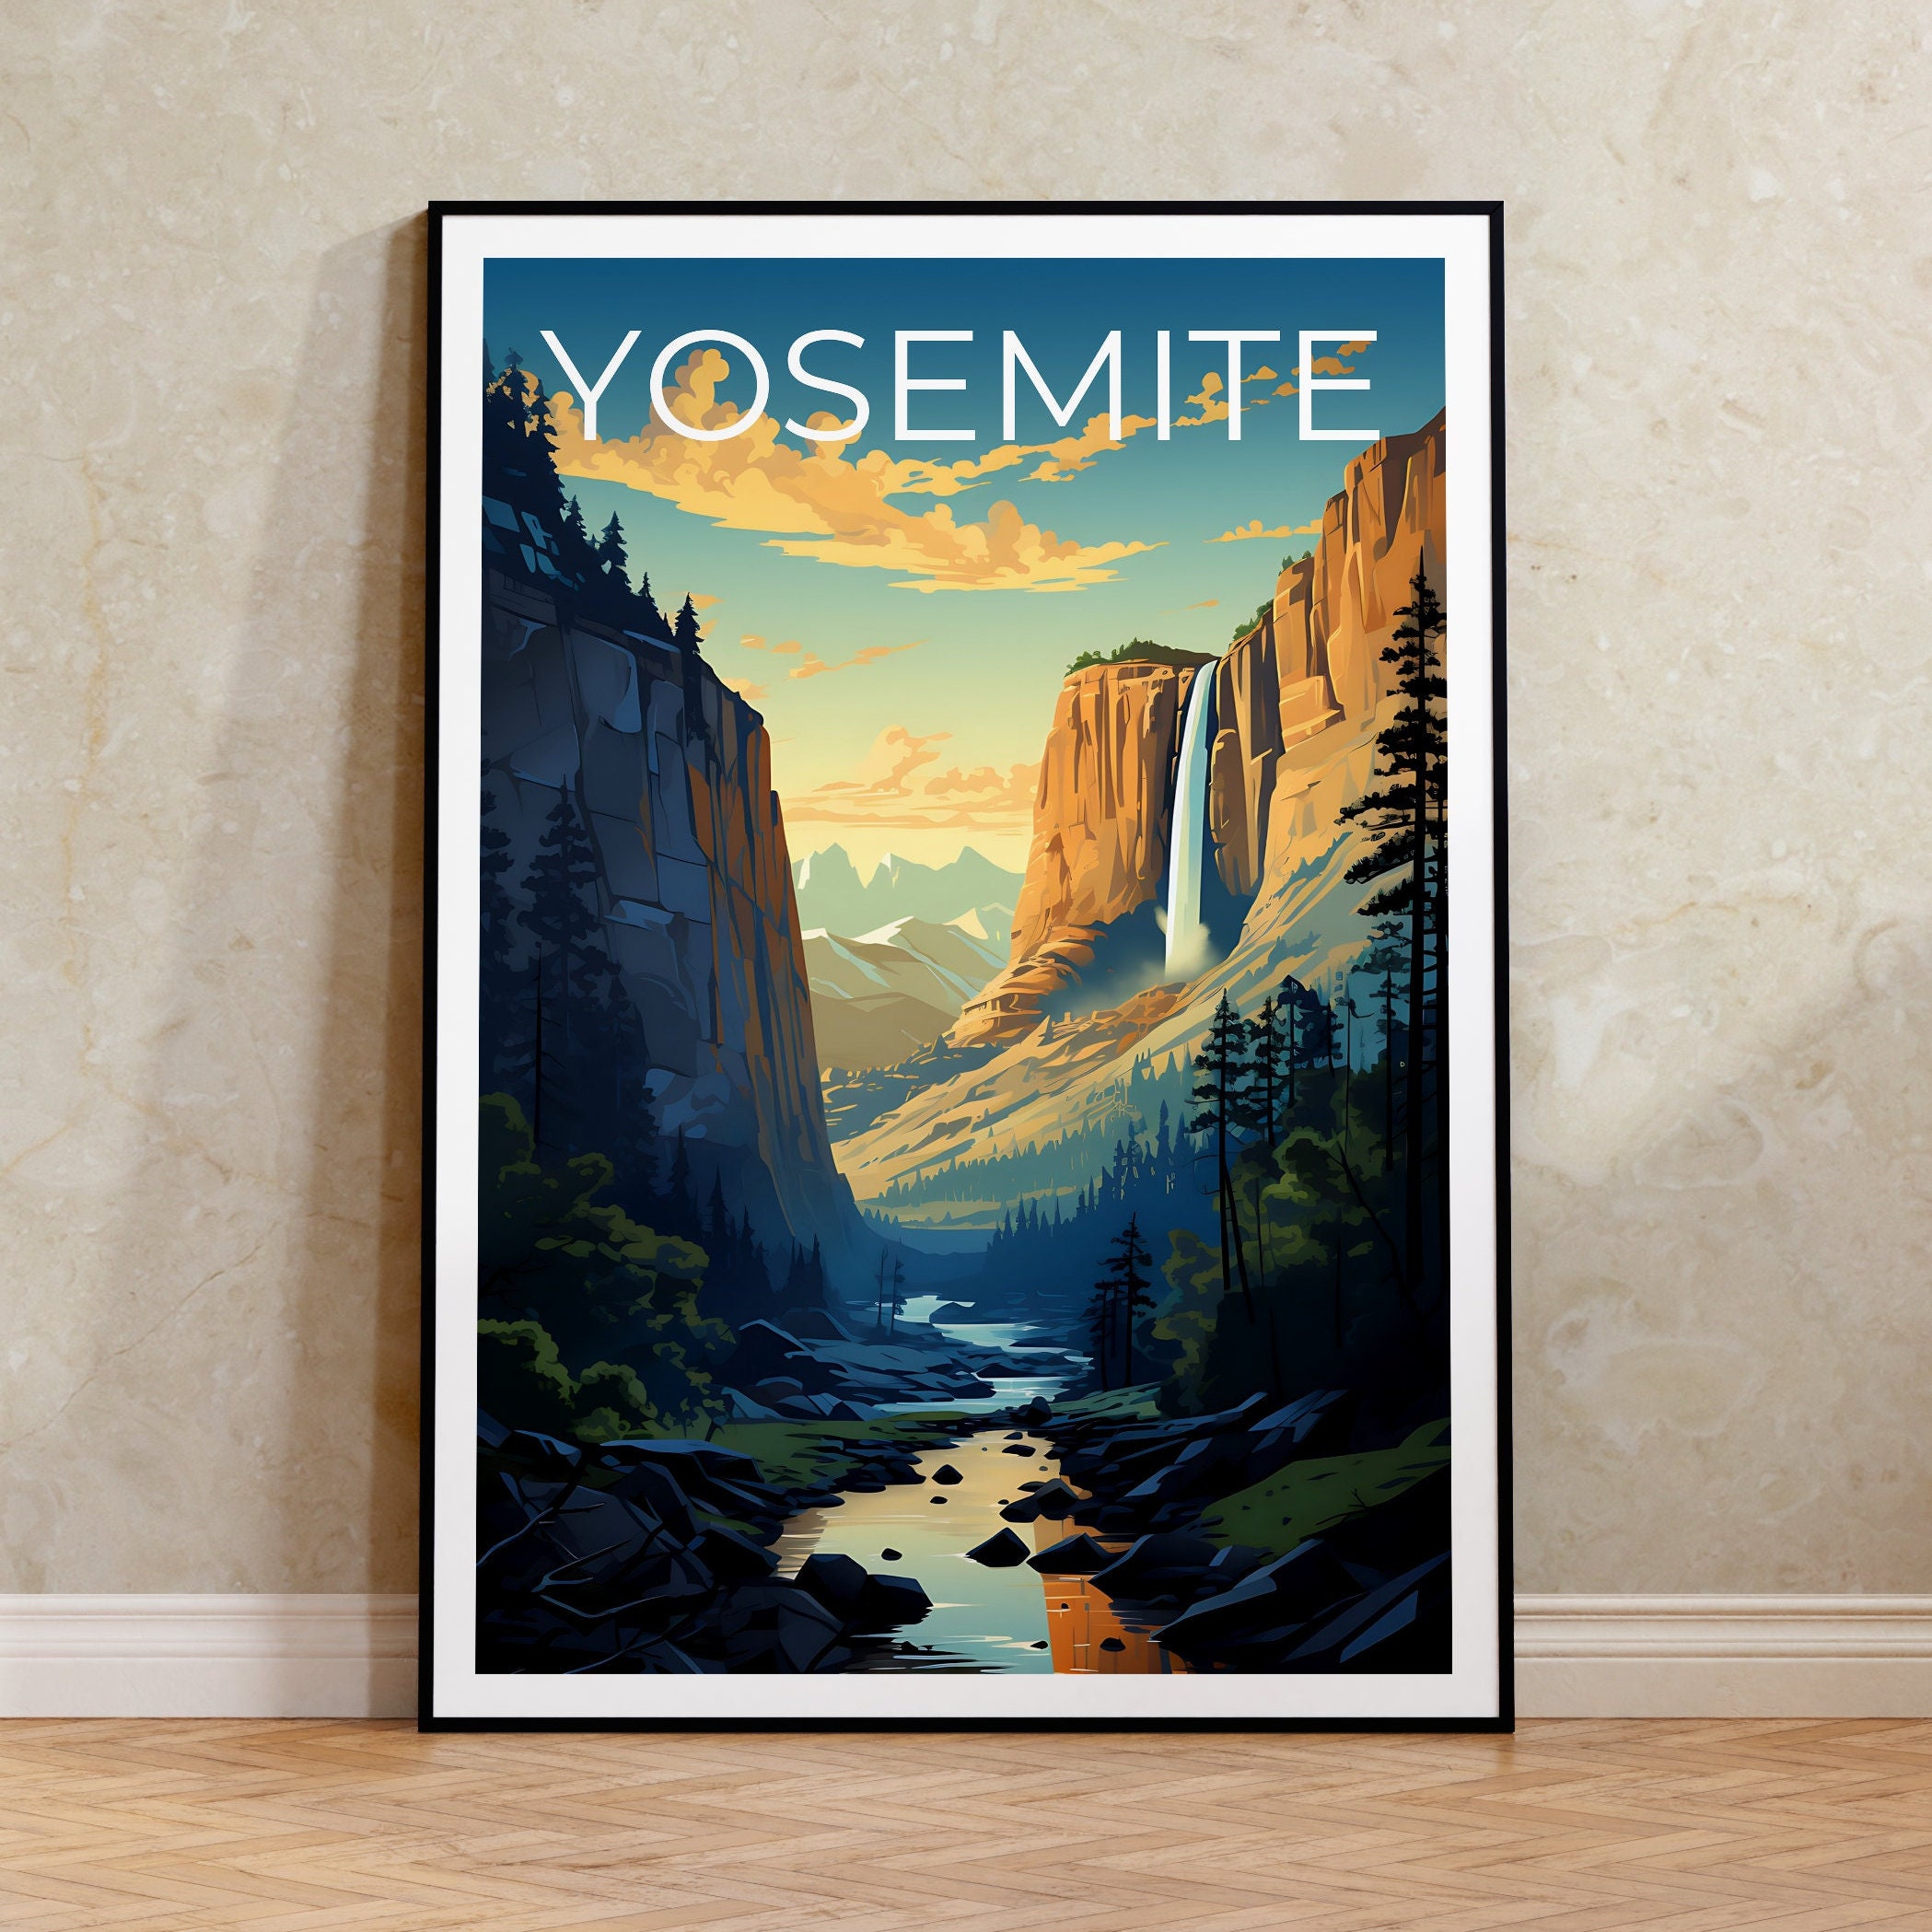 Framed Canvas Art (Gold Floating Frame) - Yosemite National Park Travel Poster by Olahoop Travel Posters ( Prints & publications > Posters > Travel